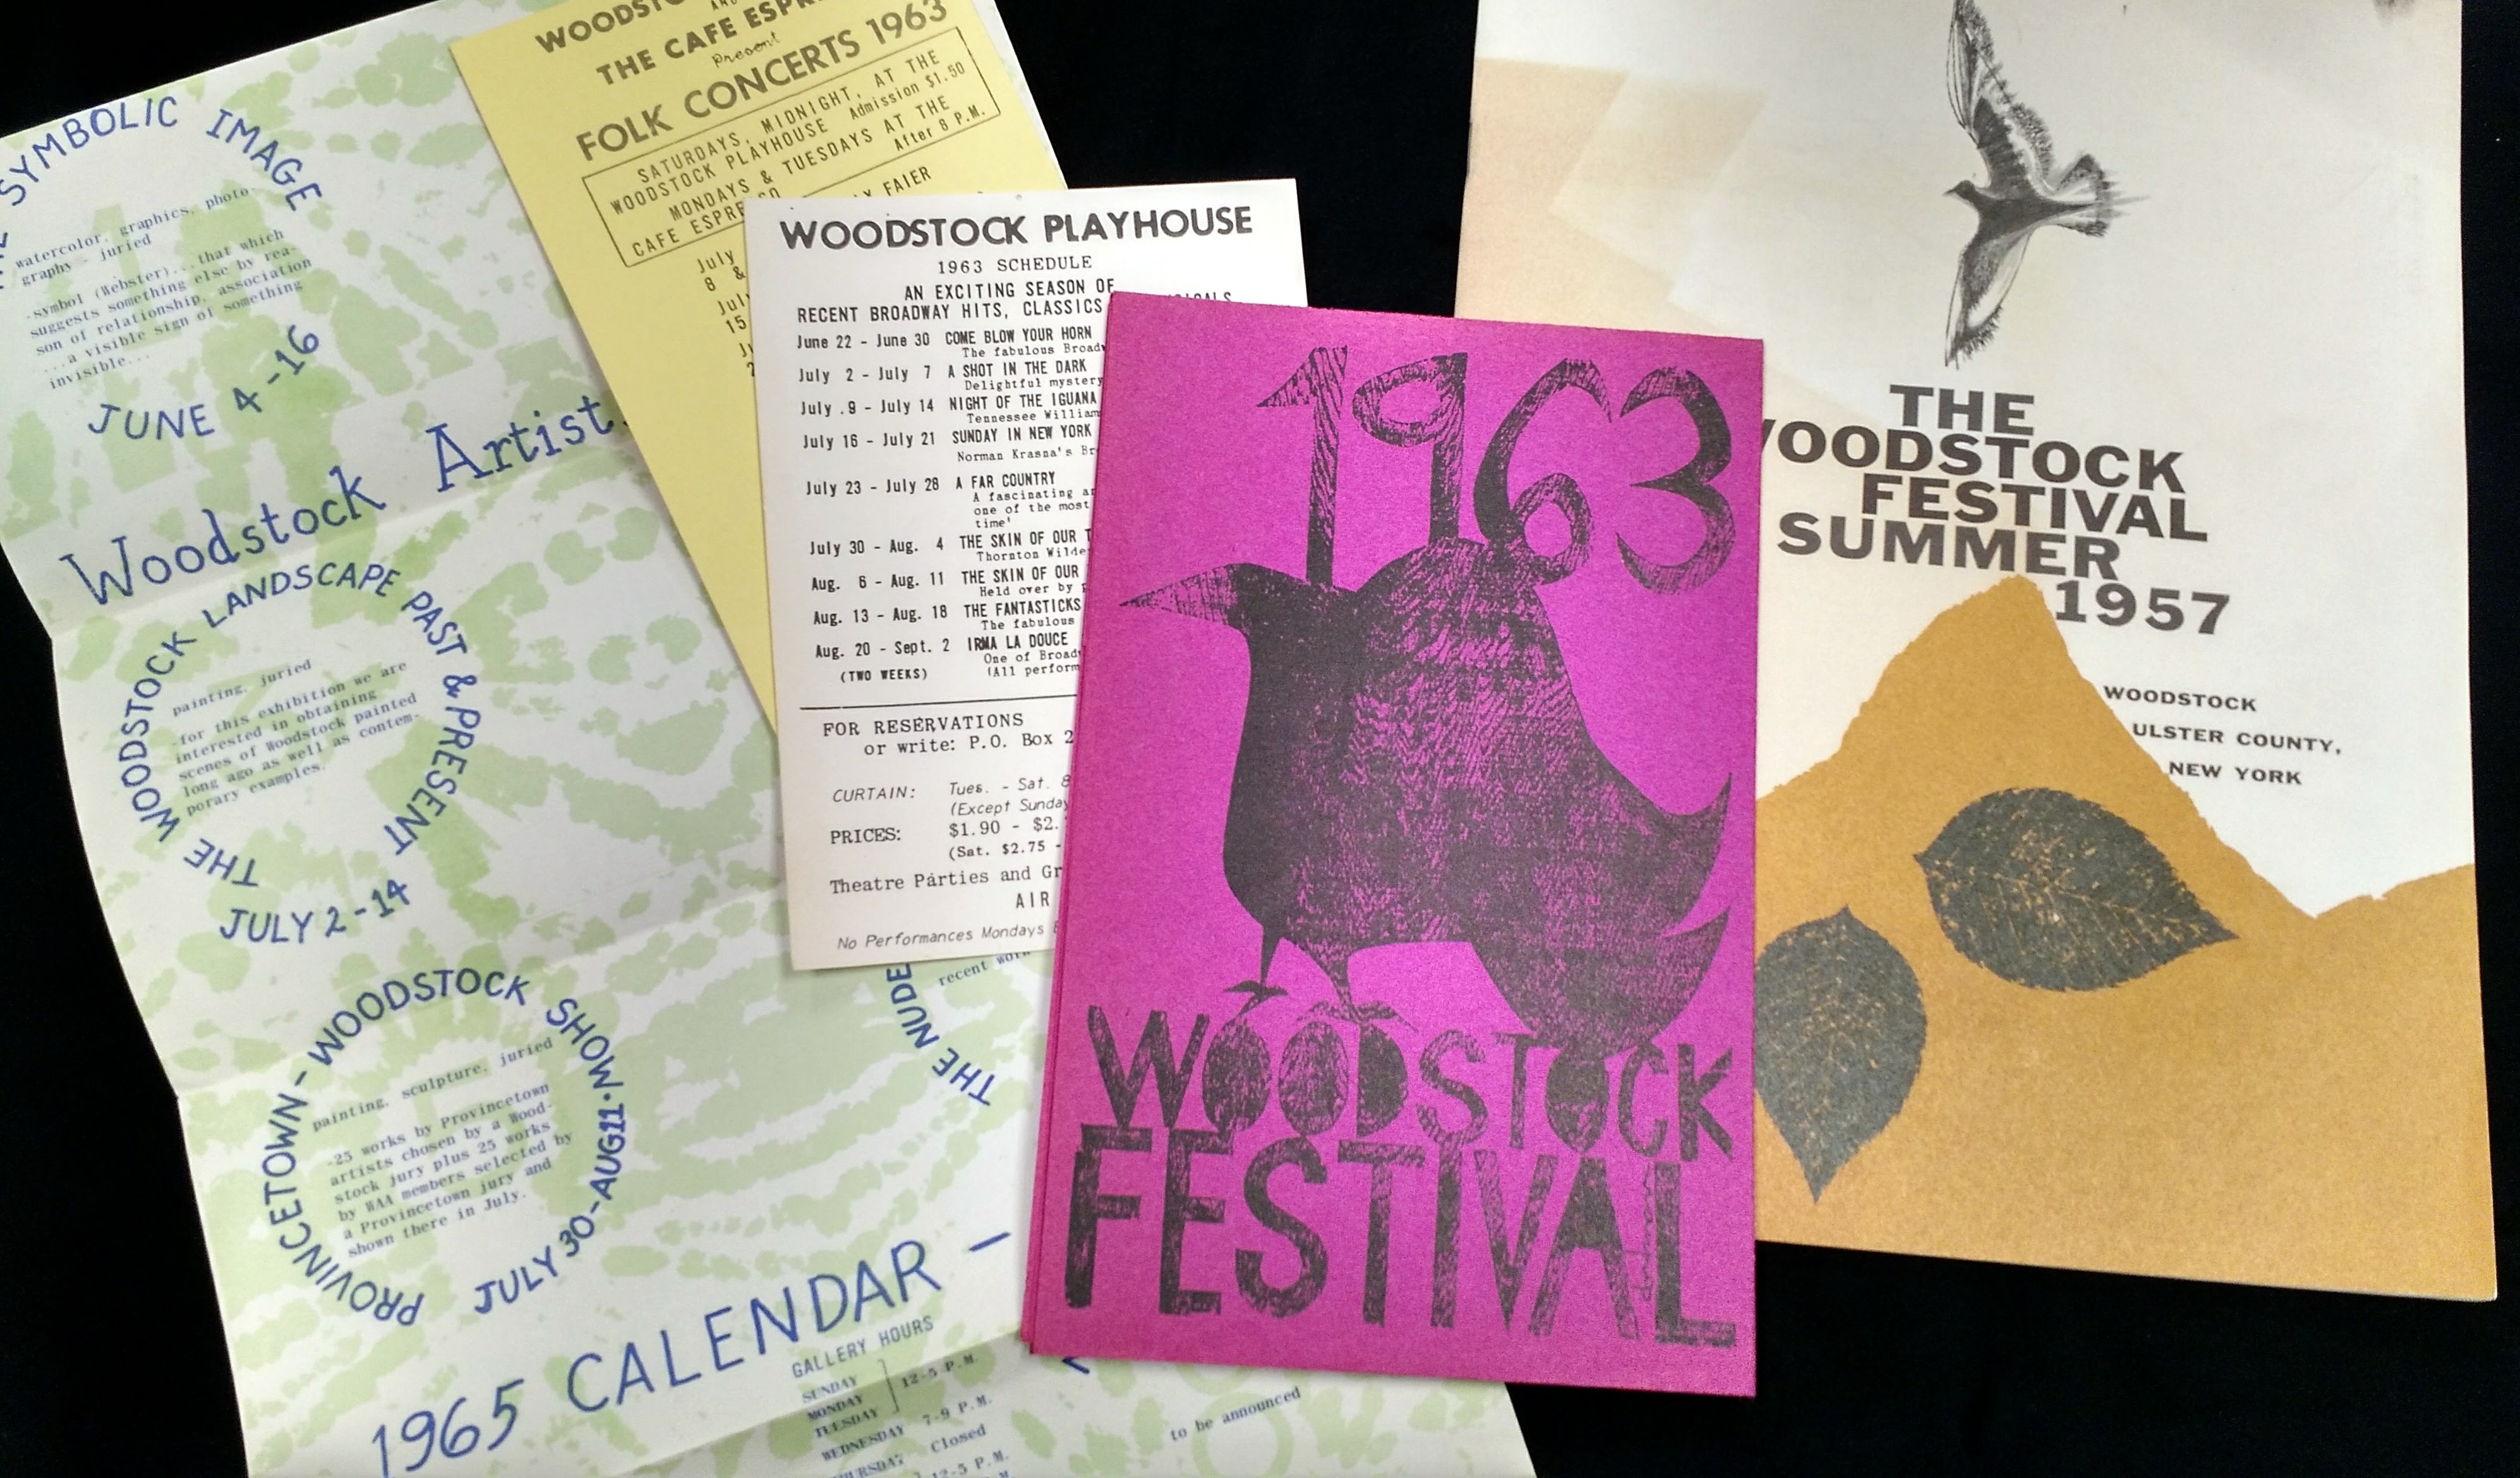 Pamphlets, a schedule, and flyer for the Woodstock Festival in 1963